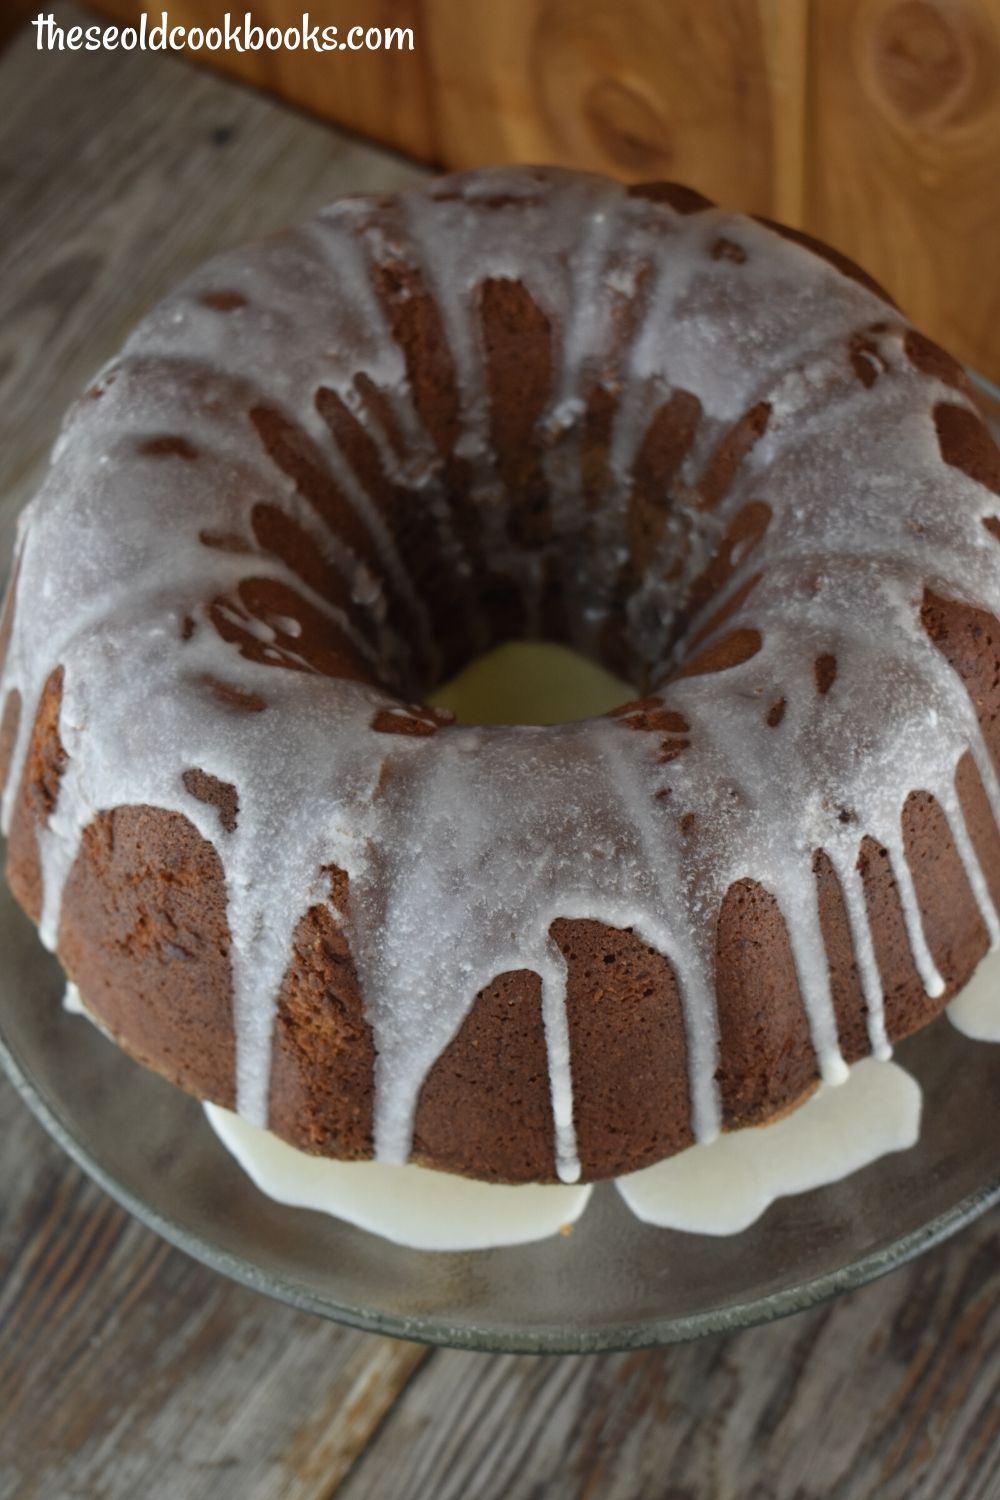 Chocolate Pound Cake is an vintage recipe that uses cocoa powder for a new spin on traditional pound cake.  This cake has a dense, moist texture that can be served up for breakfast or dessert. 